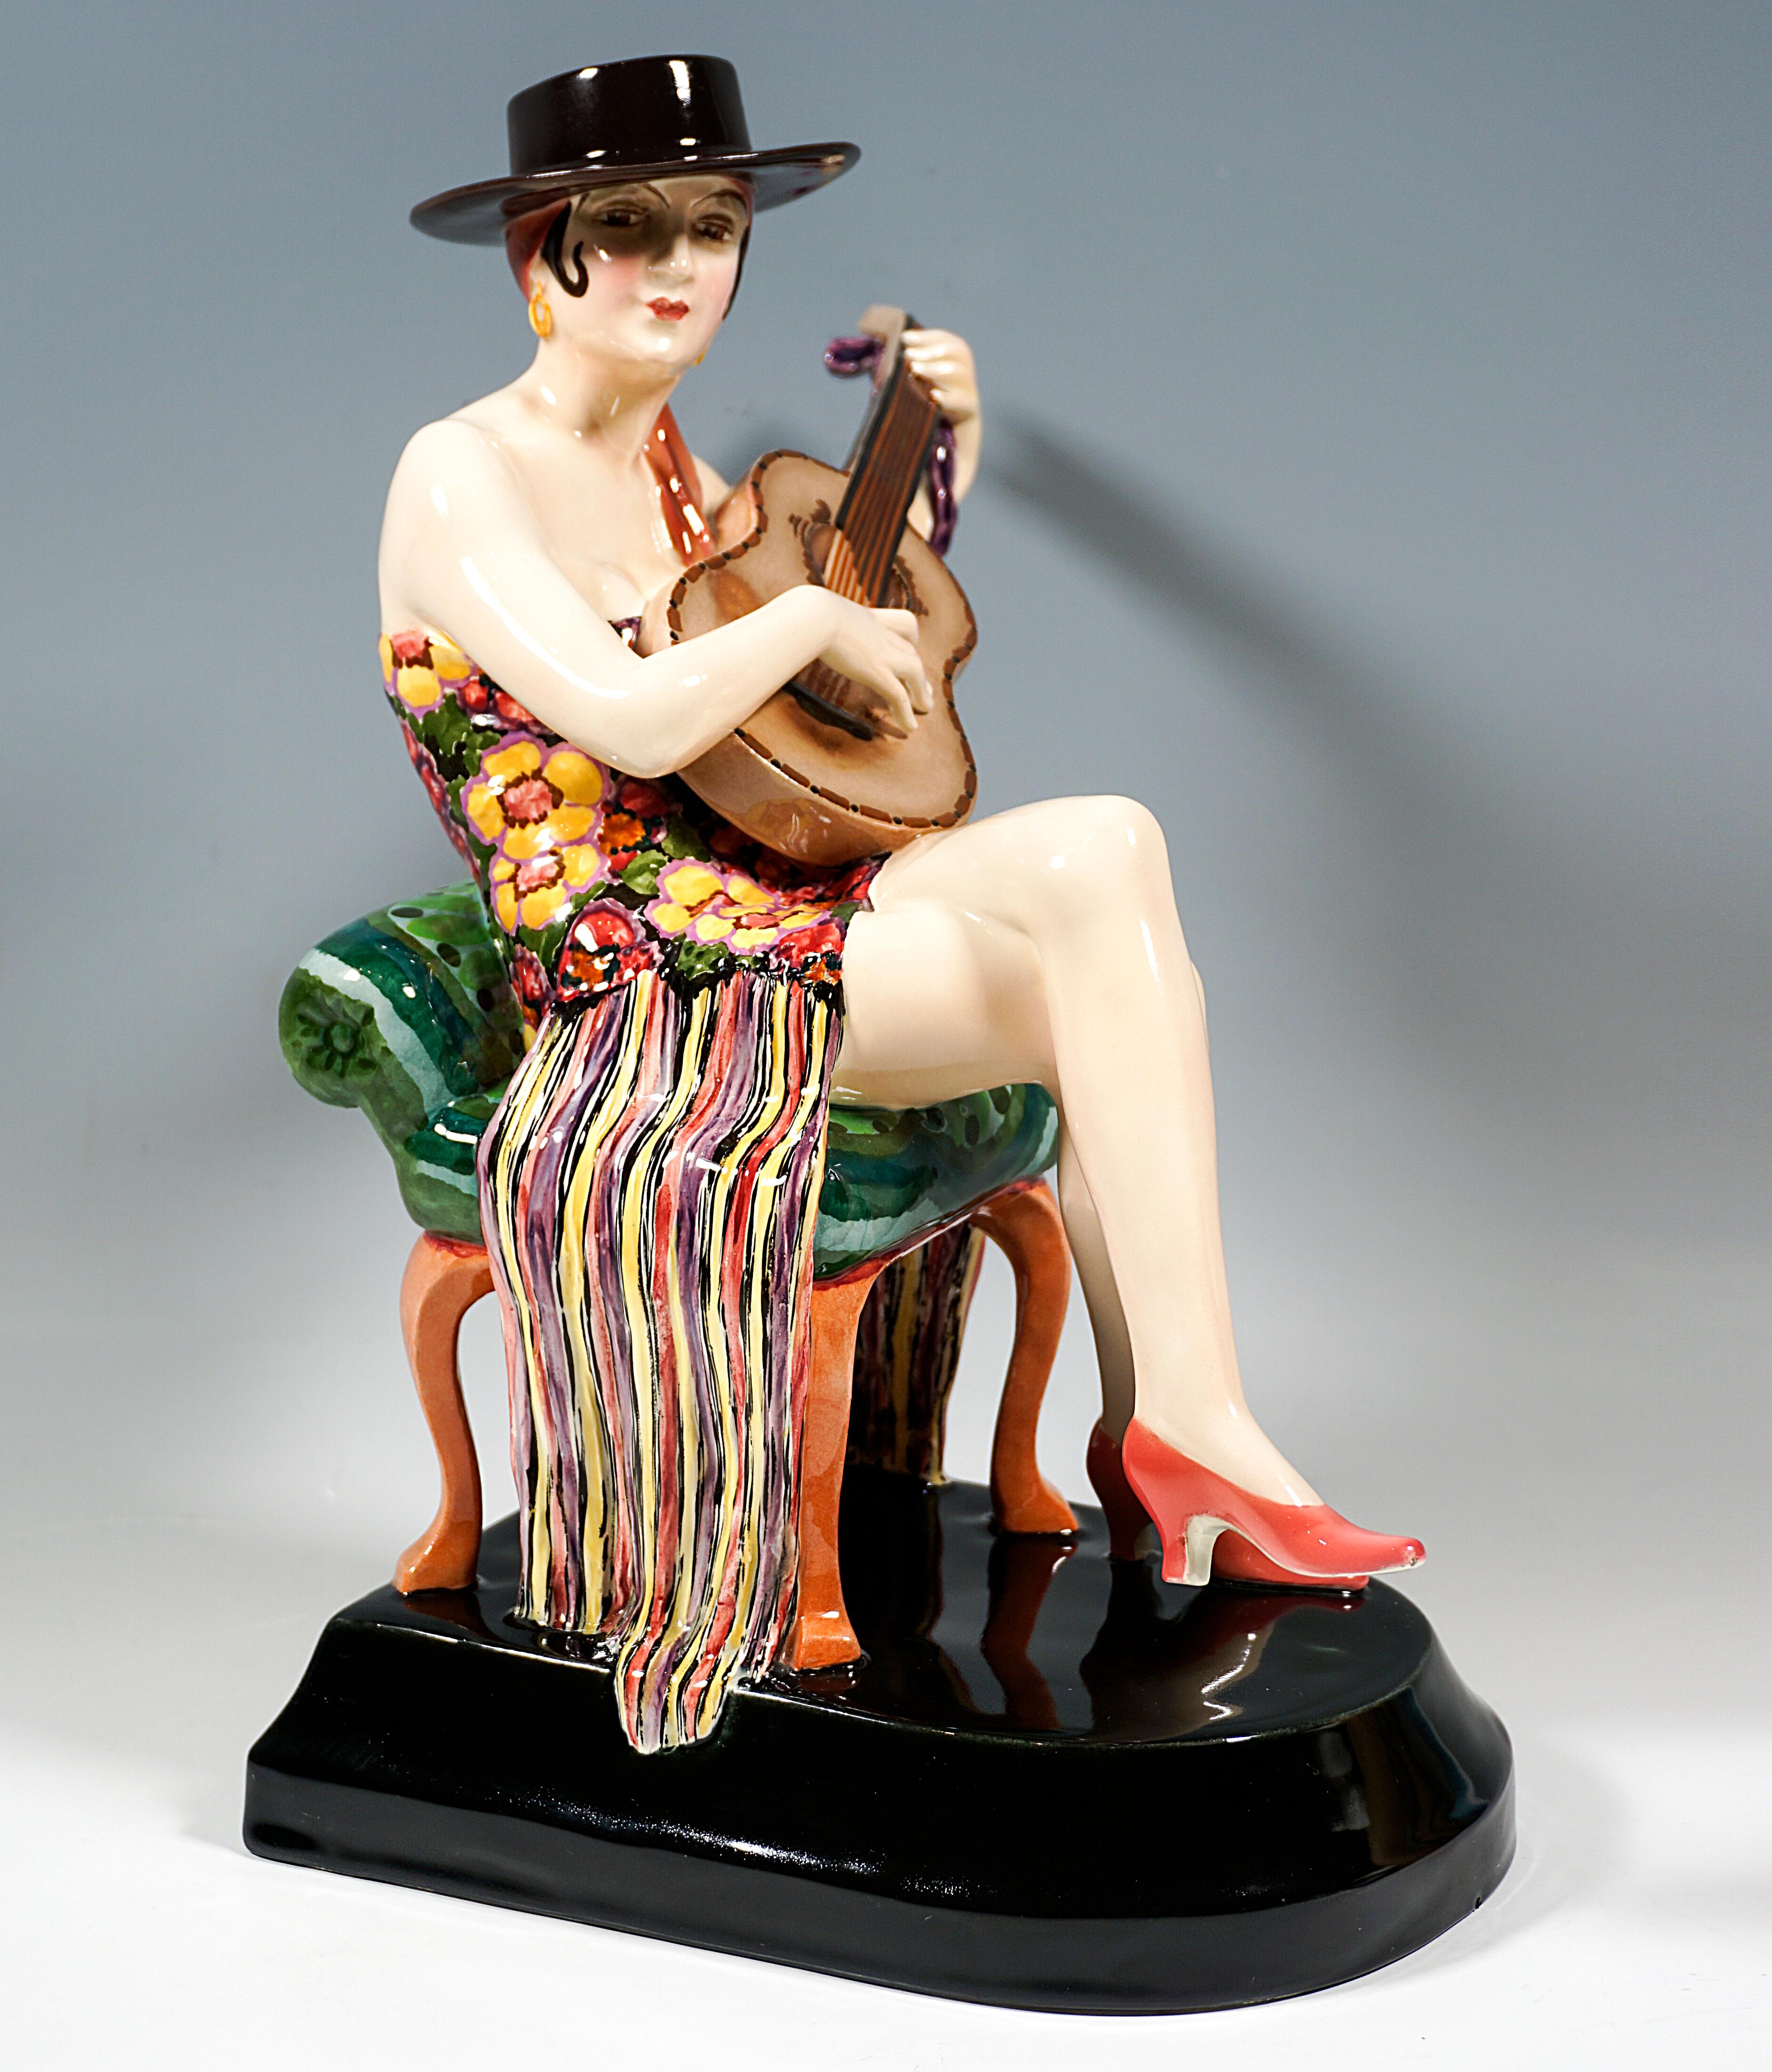 Excellent and Rare Goldscheider Vienna Art Déco Ceramic Figurine: 
Dancer sitting on a small bench upholstered with green fabric, wearing a short, strapless costume with colorful floral decoration, her legs crossed, playing a guitar, wearing a